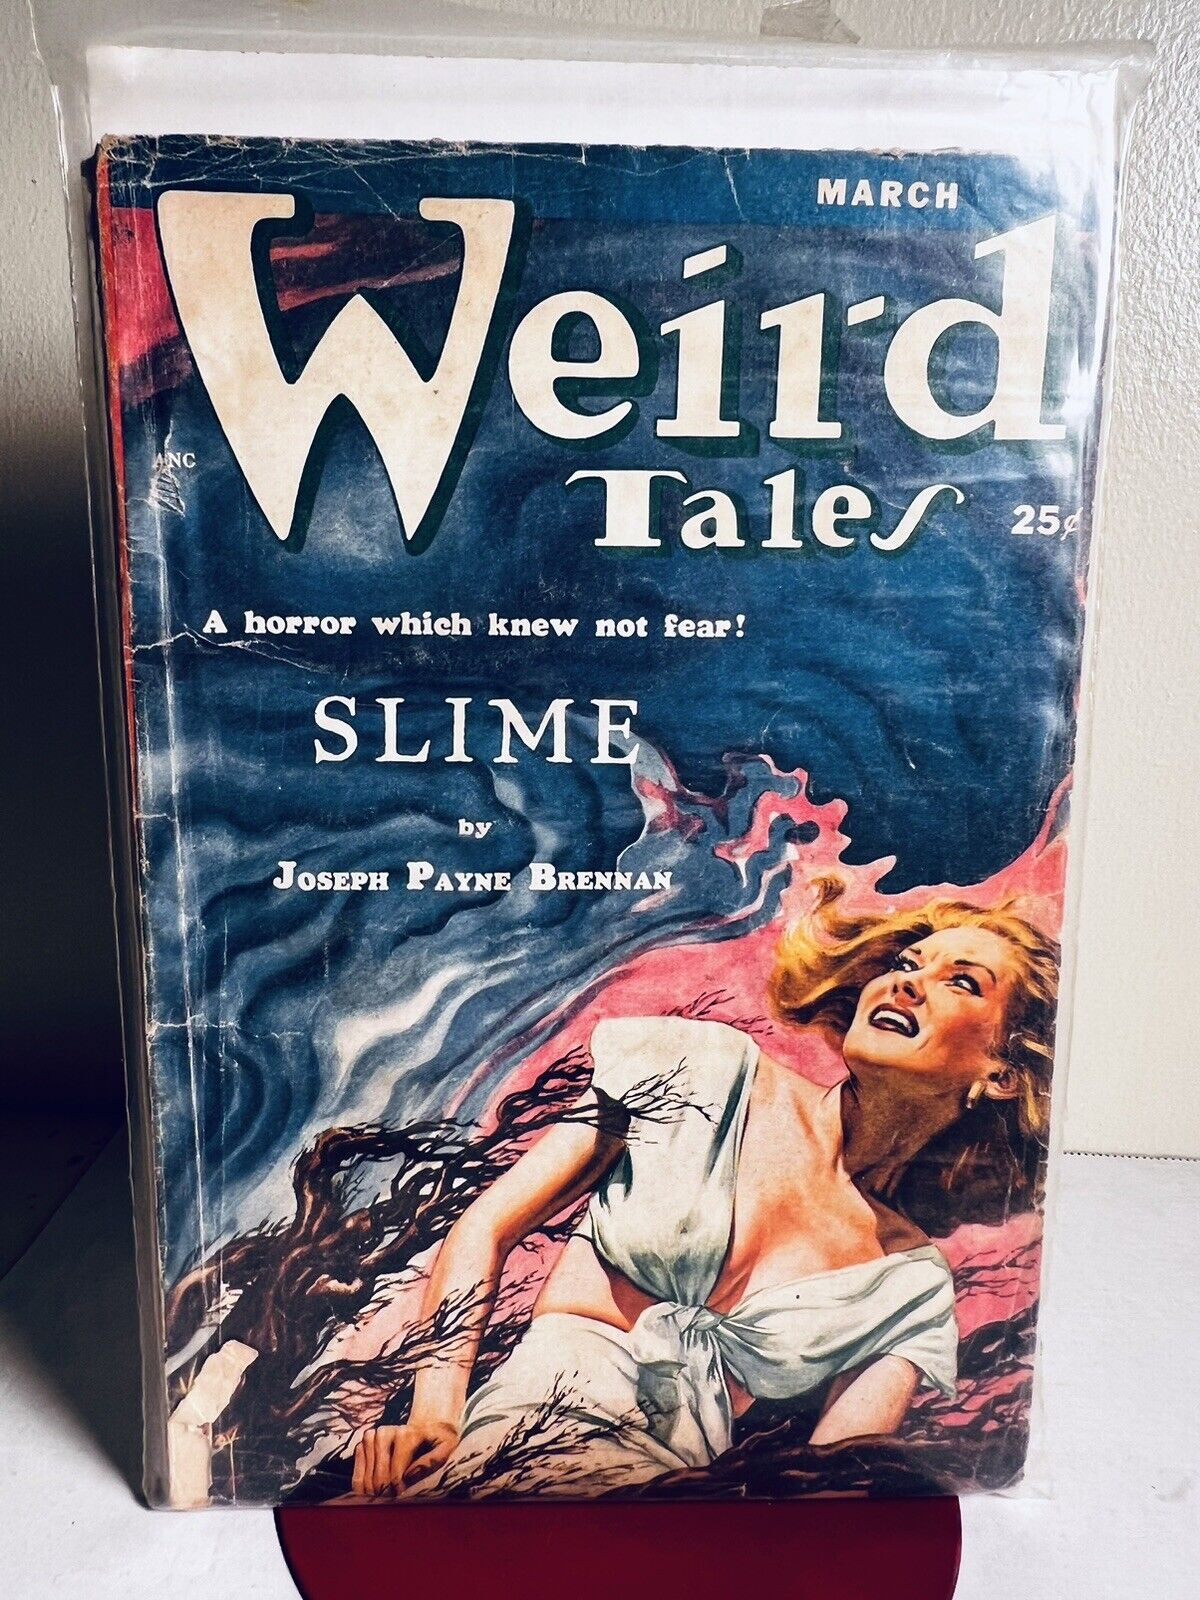 Weird Tales March 1953 Virgil Finlay cover “Slime” short story (The Blob)